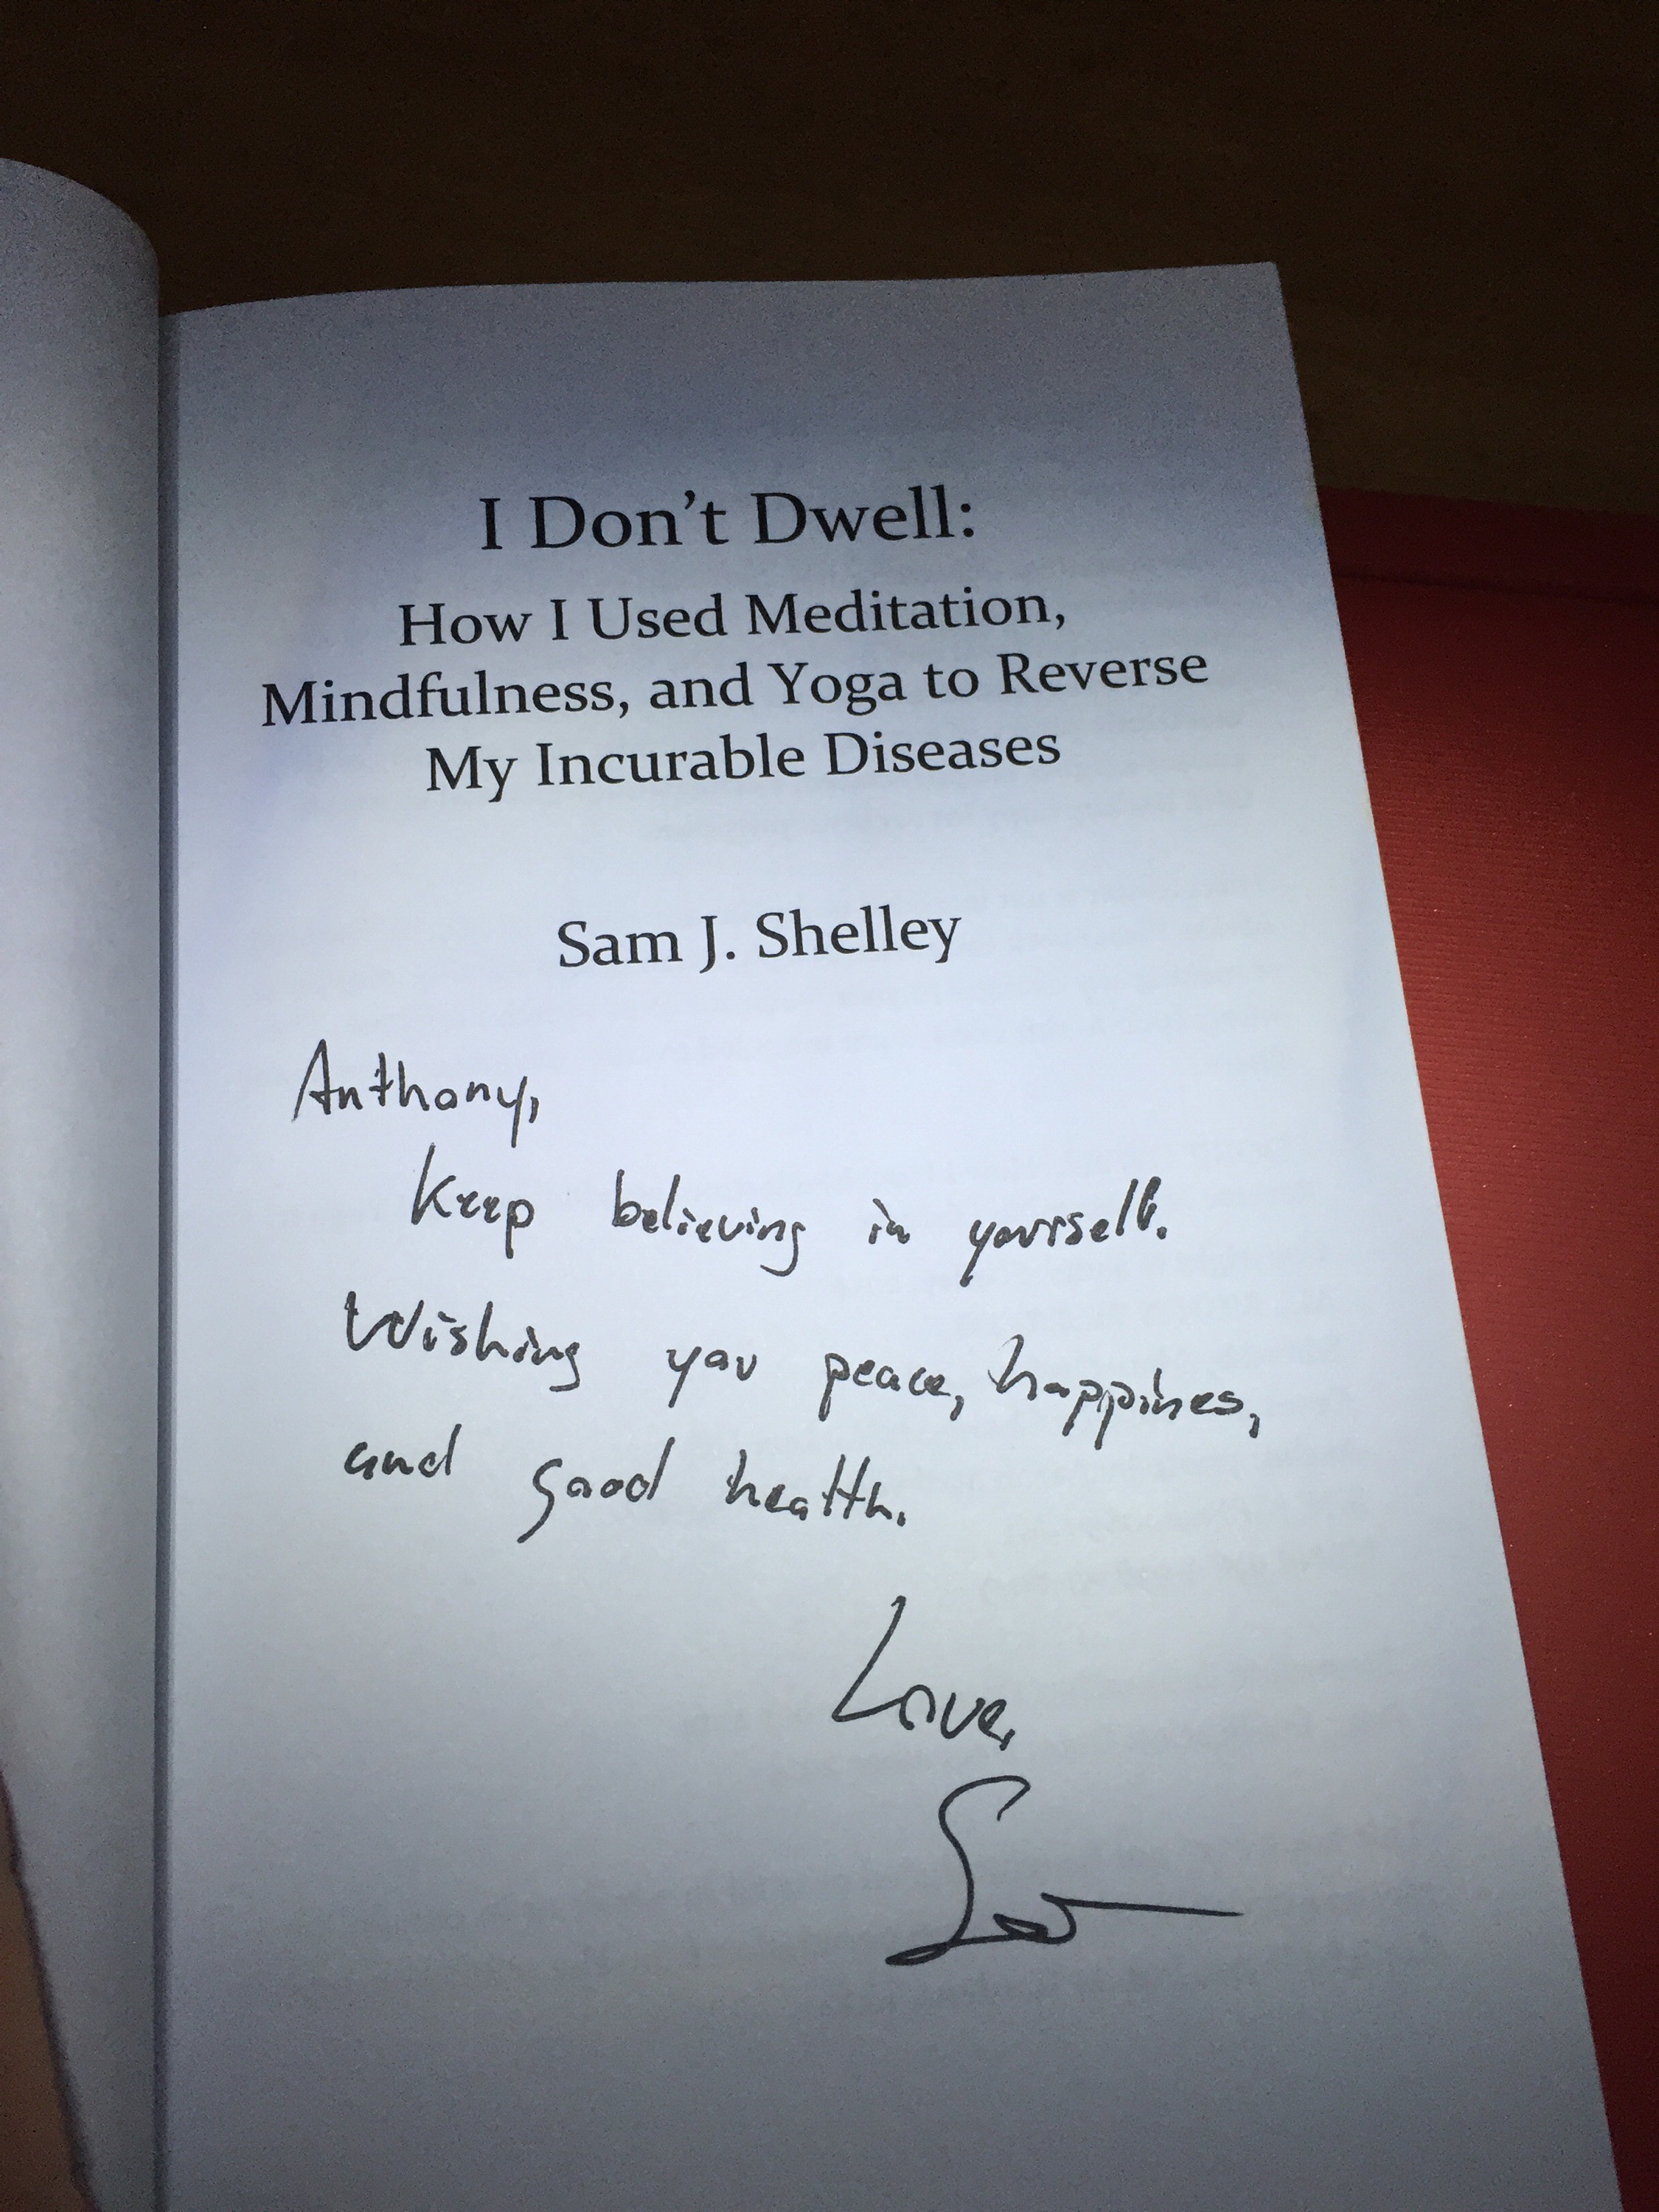 I Don't Dwell by: Sam Shelley  - Inscription for Anthony Hayes